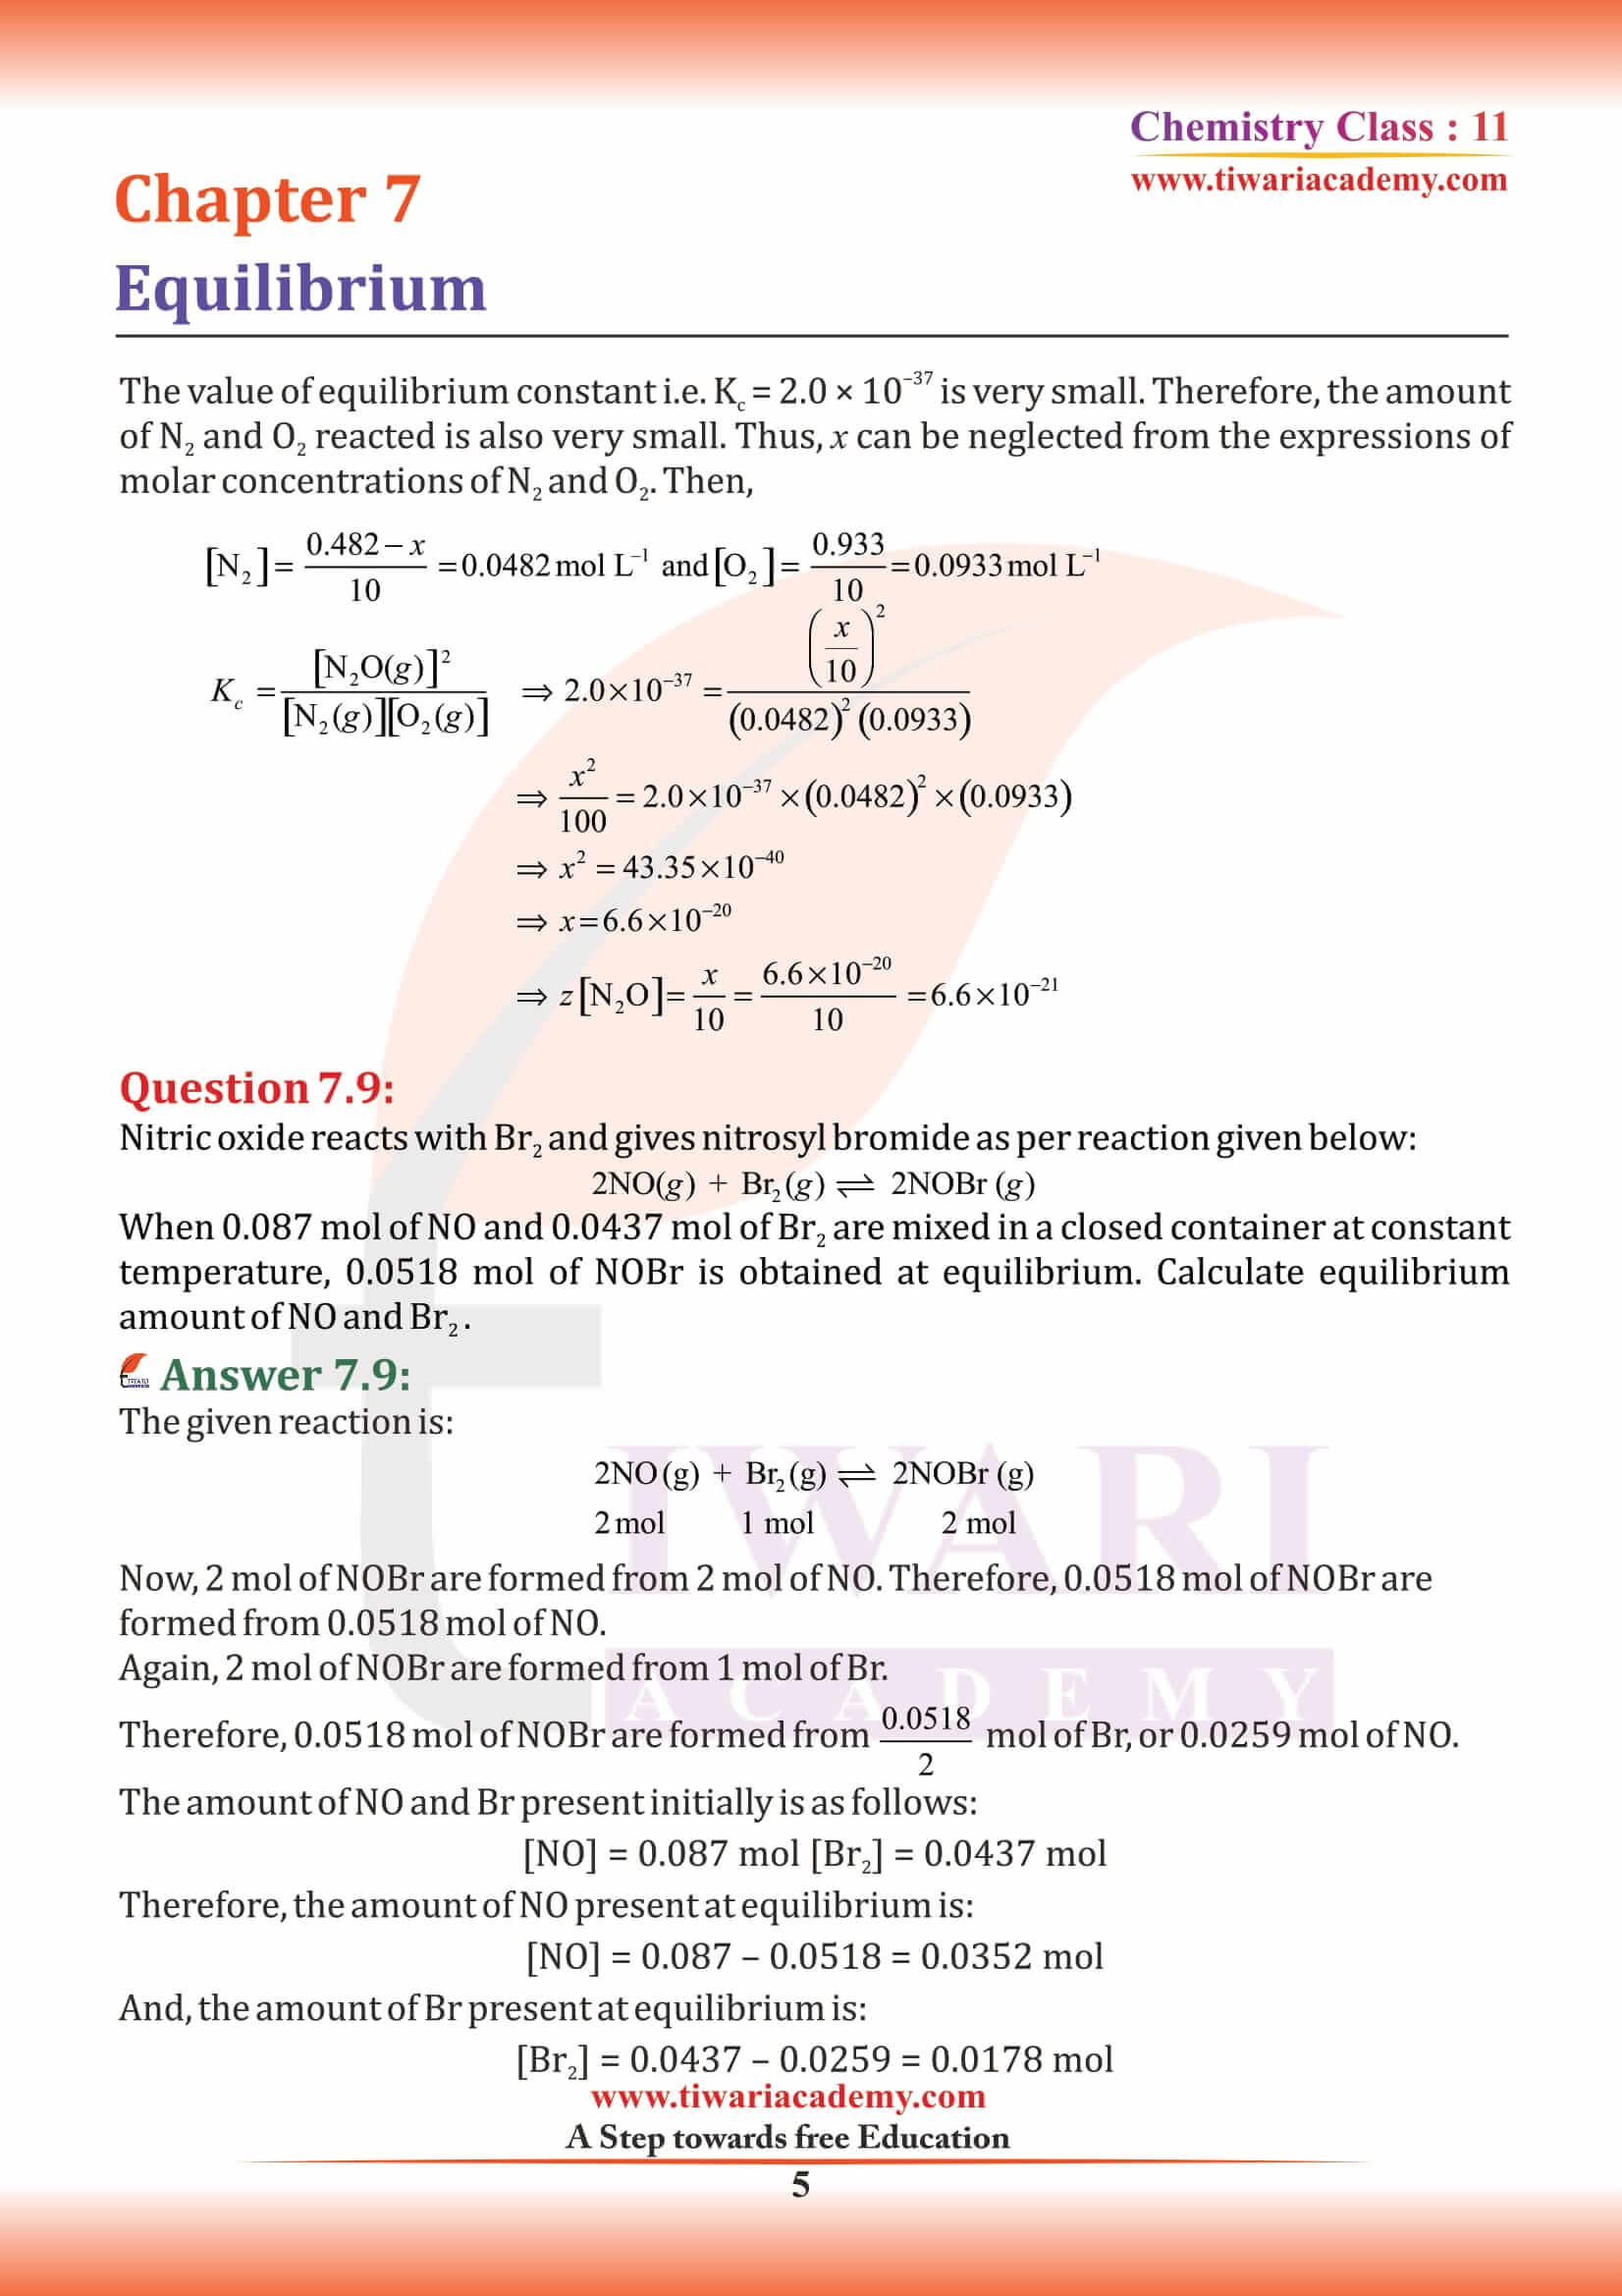 NCERT Solutions for Class 11 Chemistry Chapter 7 free download